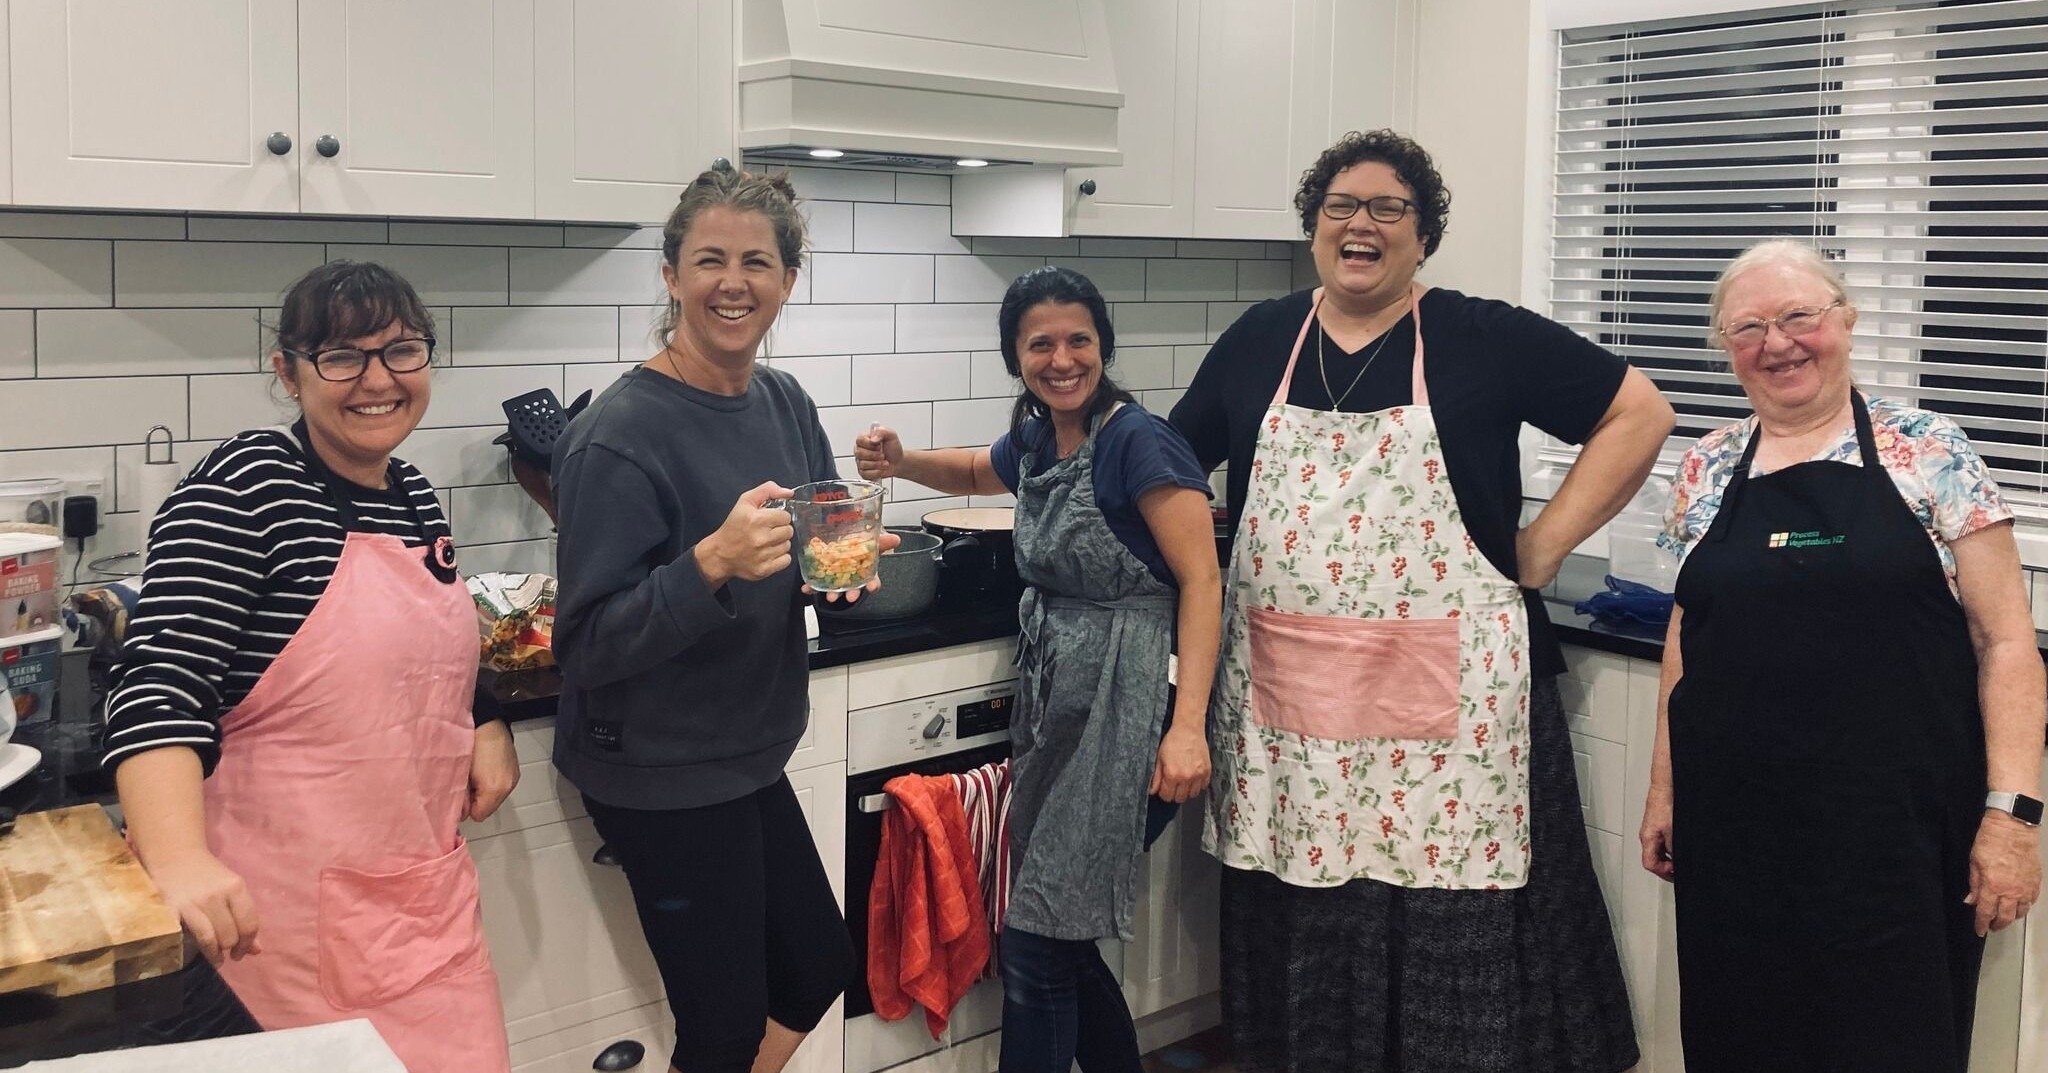 These lovely ladies were part of the &lsquo;Let&rsquo;s Get Cooking&rsquo; session last Saturday. We are sending pre-made meals to communities in need after Cyclone Gabrielle. 

Could you partner with us to make meals for the Puketapu community?
We w